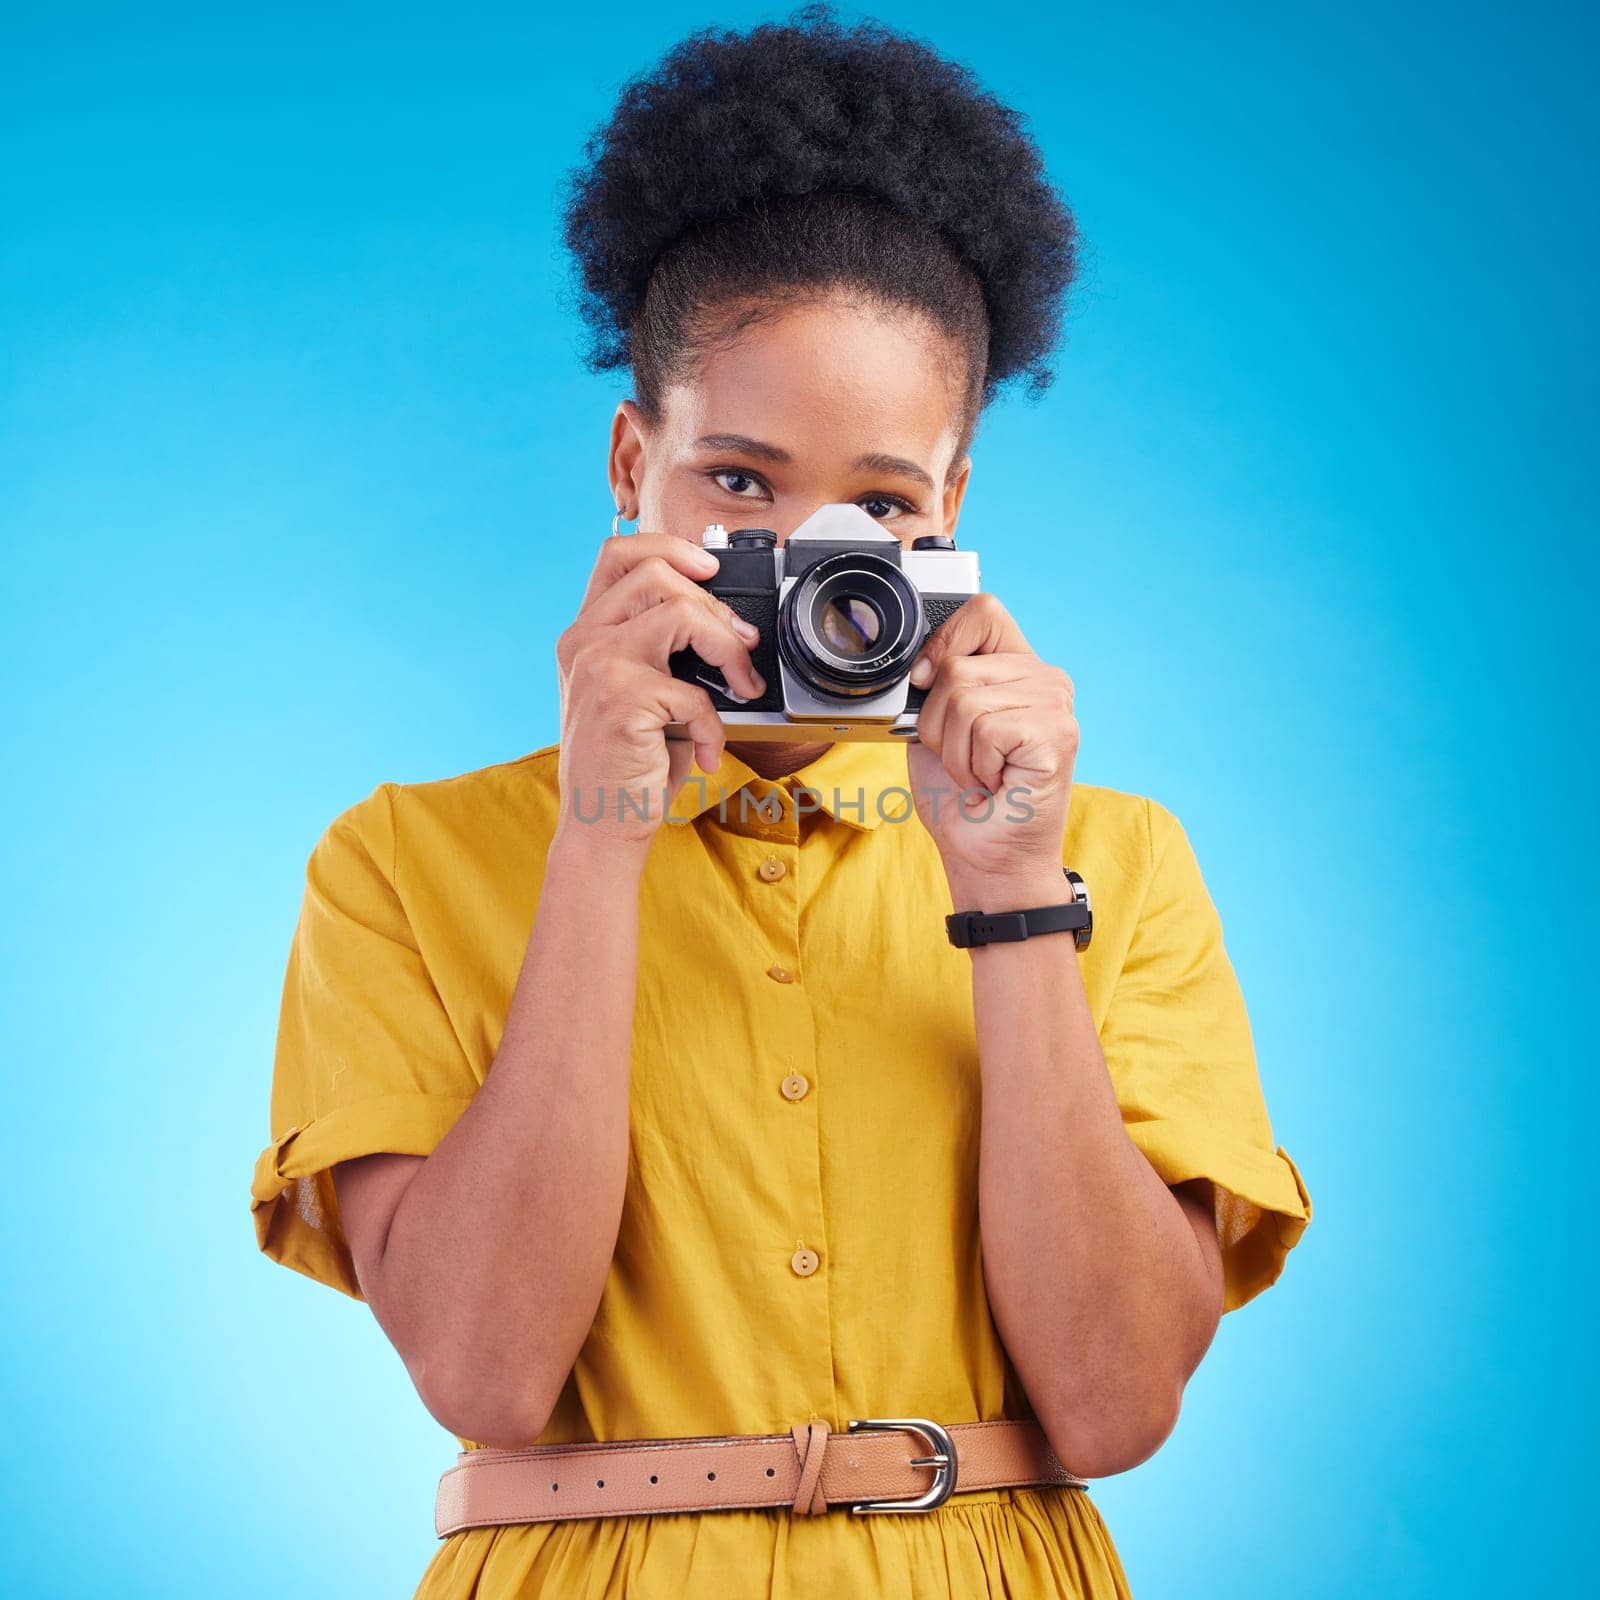 Photography, portrait and black woman with camera isolated on blue background, creative artist job talent. Art, face of happy photographer with hobby or career in studio on travel holiday photoshoot. by YuriArcurs